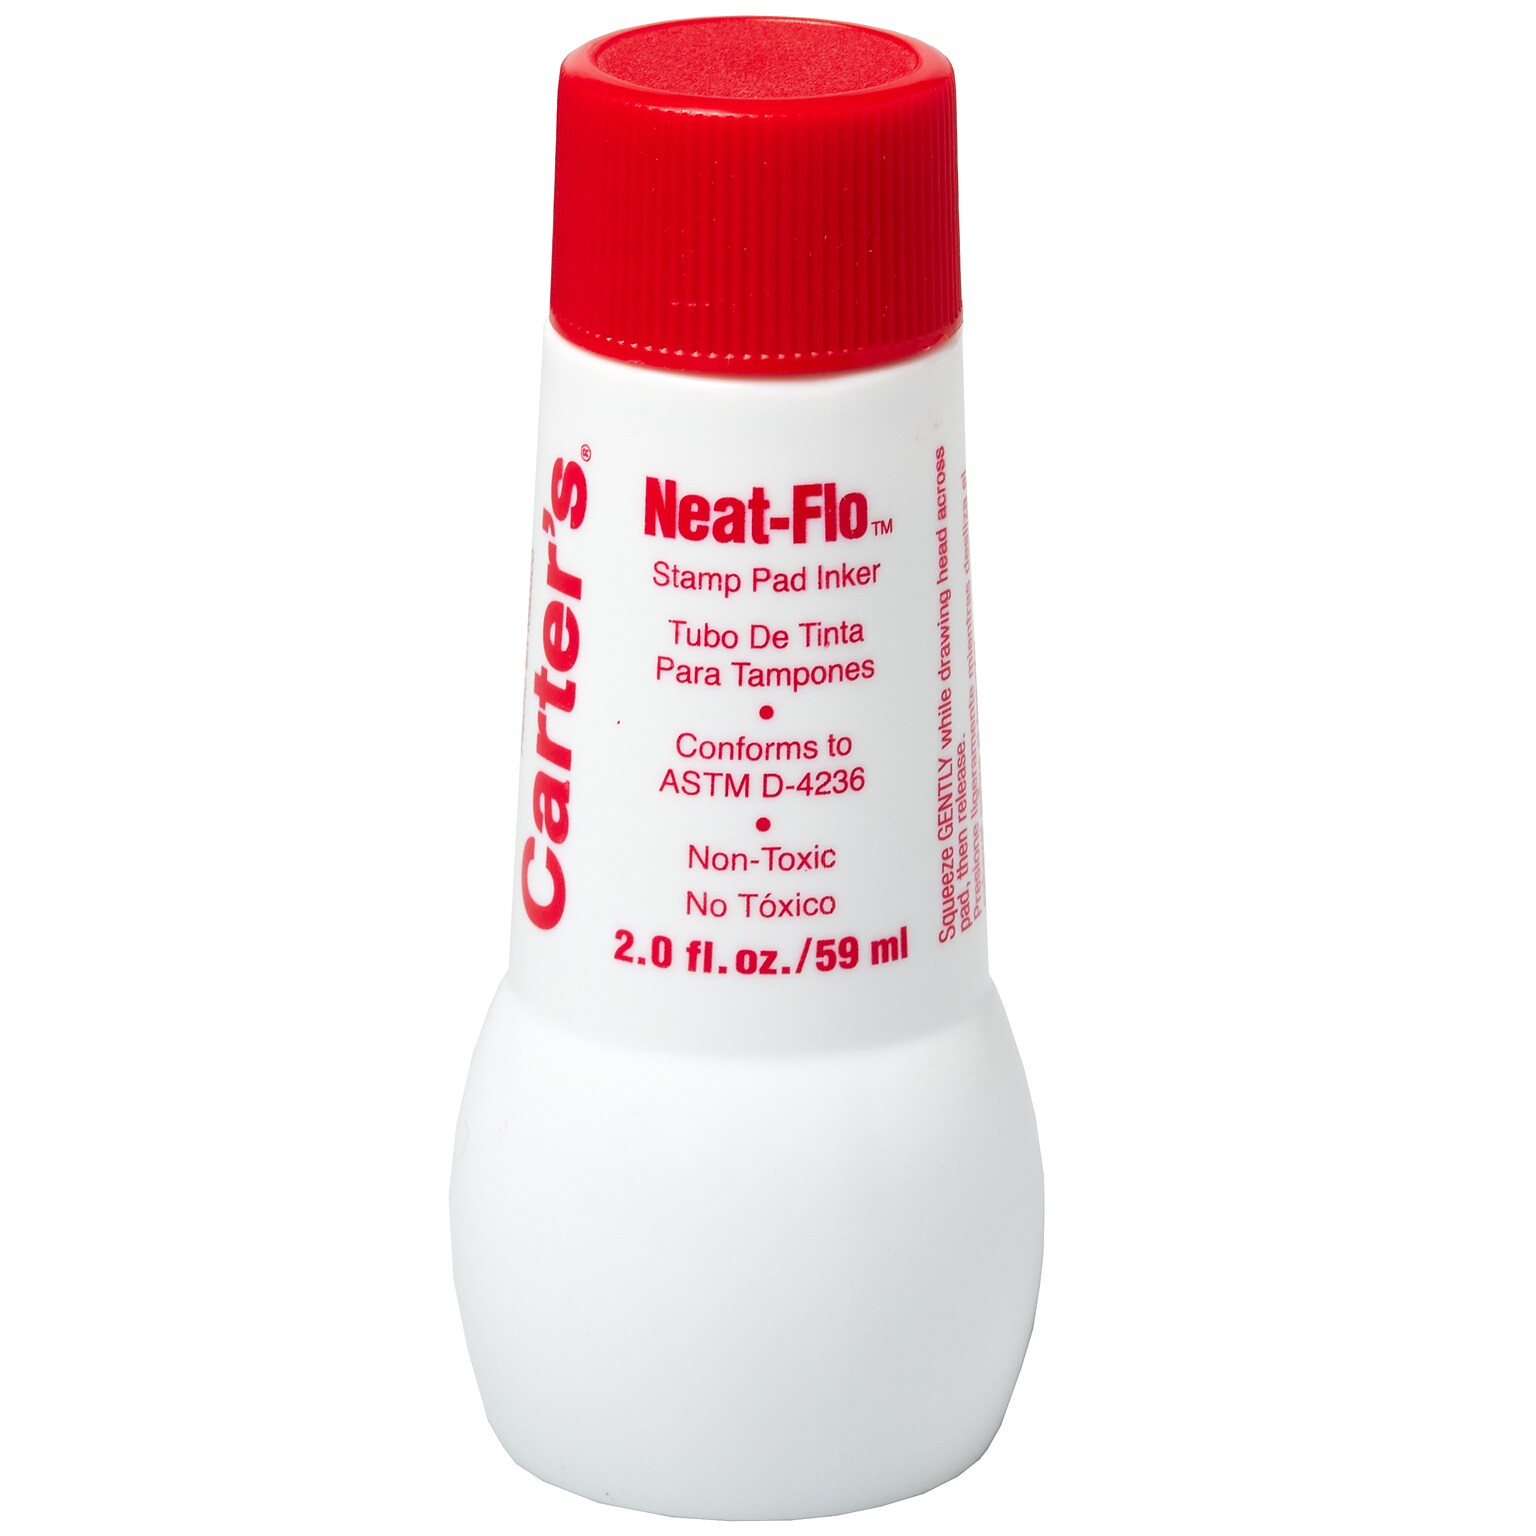 Carters Neat-Flo Ink Refill, Red Ink (21447)